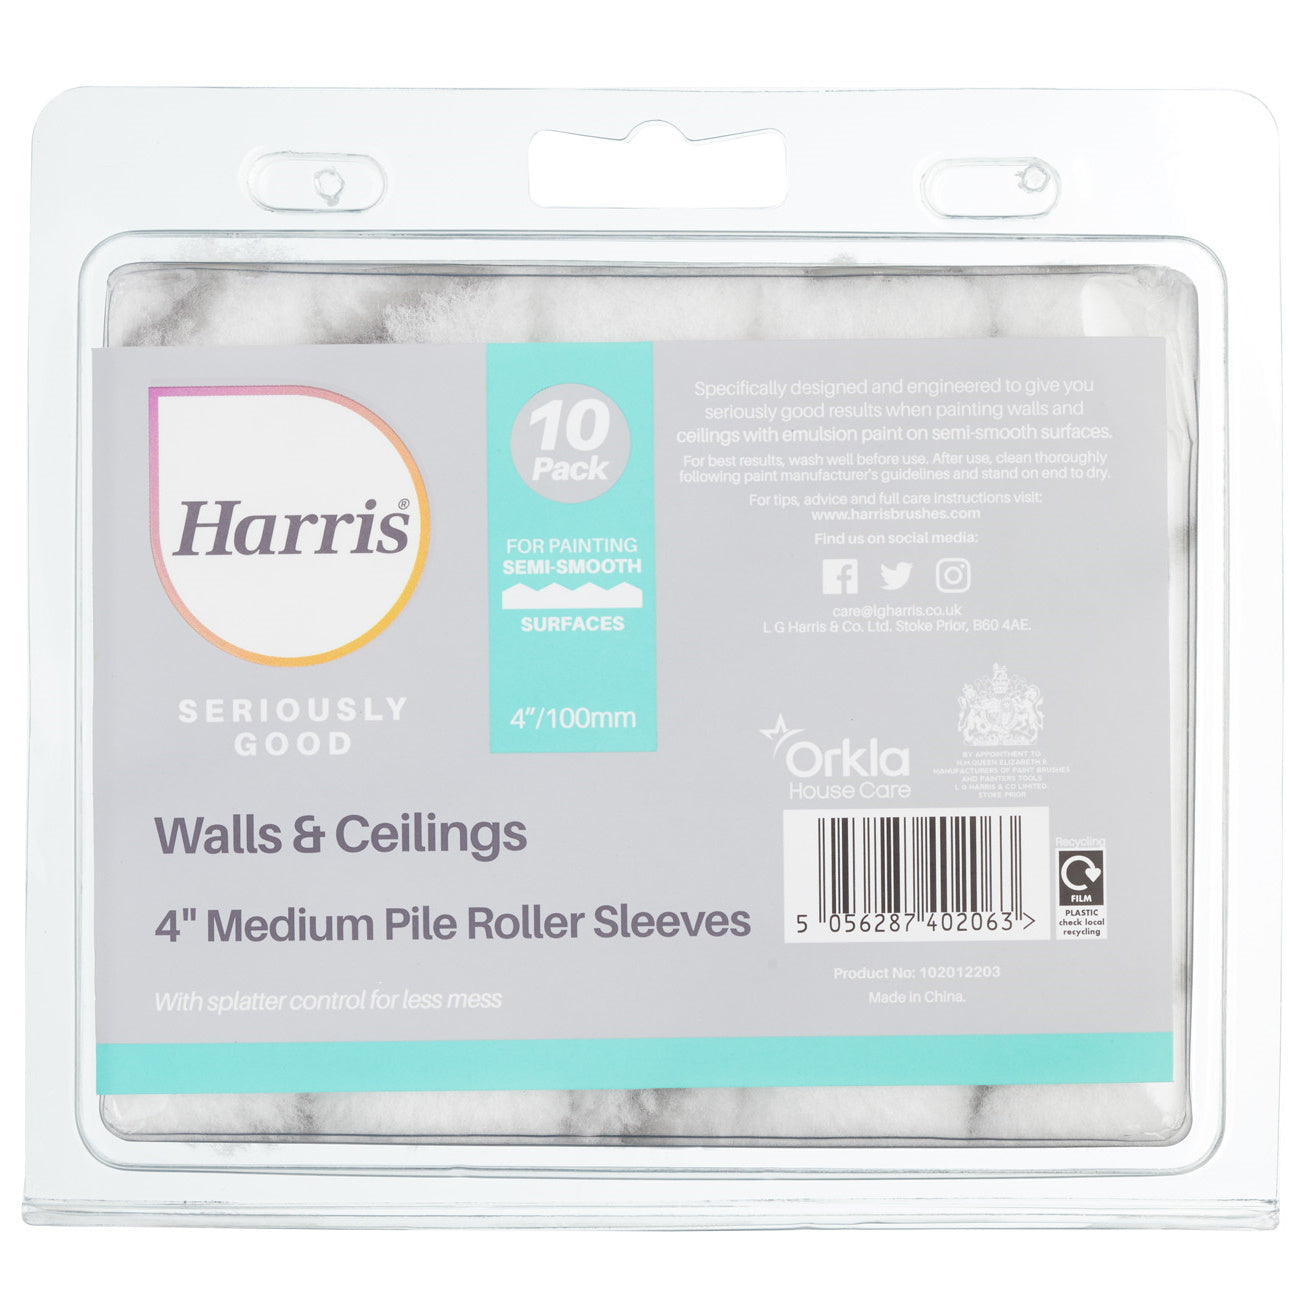 Harris Seriously Good 102012203 Wall & Ceiling 4" Roller Sleeve Medium Pile Pkt10 - Premium Rollers from HARRIS - Just $6.2! Shop now at W Hurst & Son (IW) Ltd